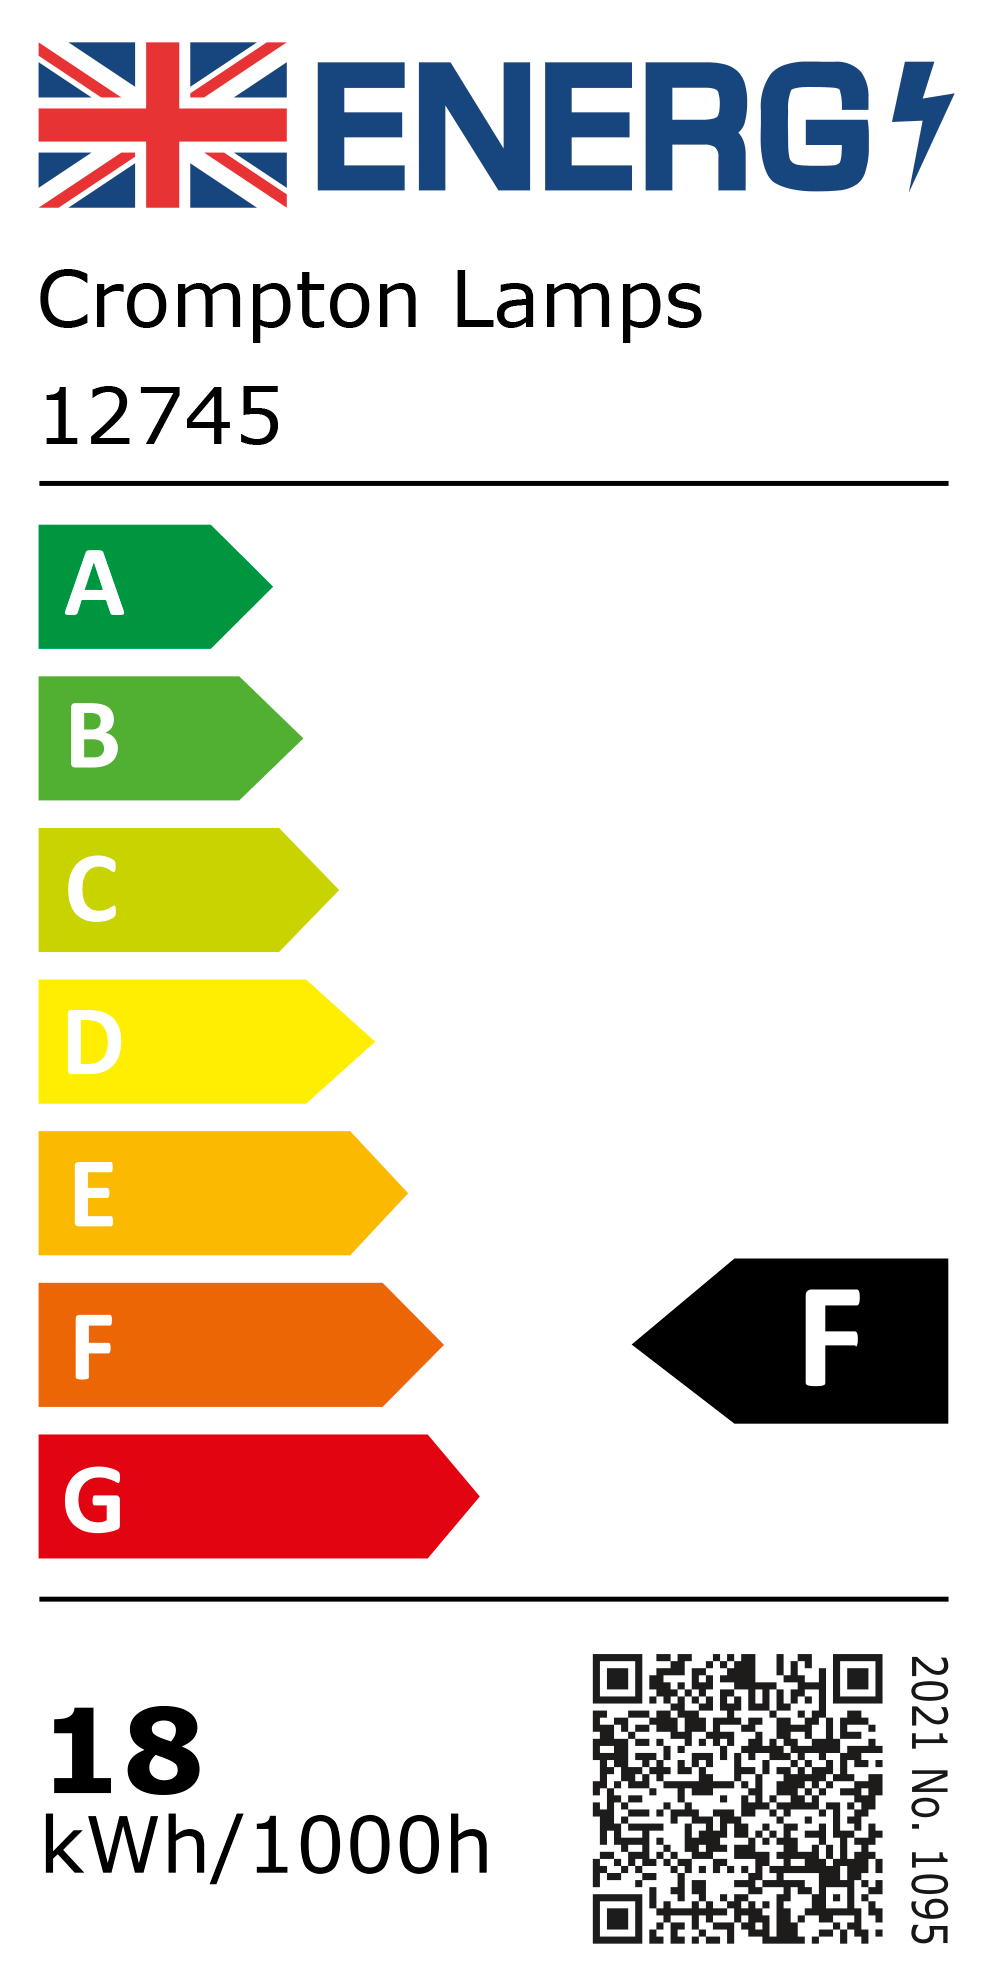 New 2021 Energy Rating Label: Stock Code 12745